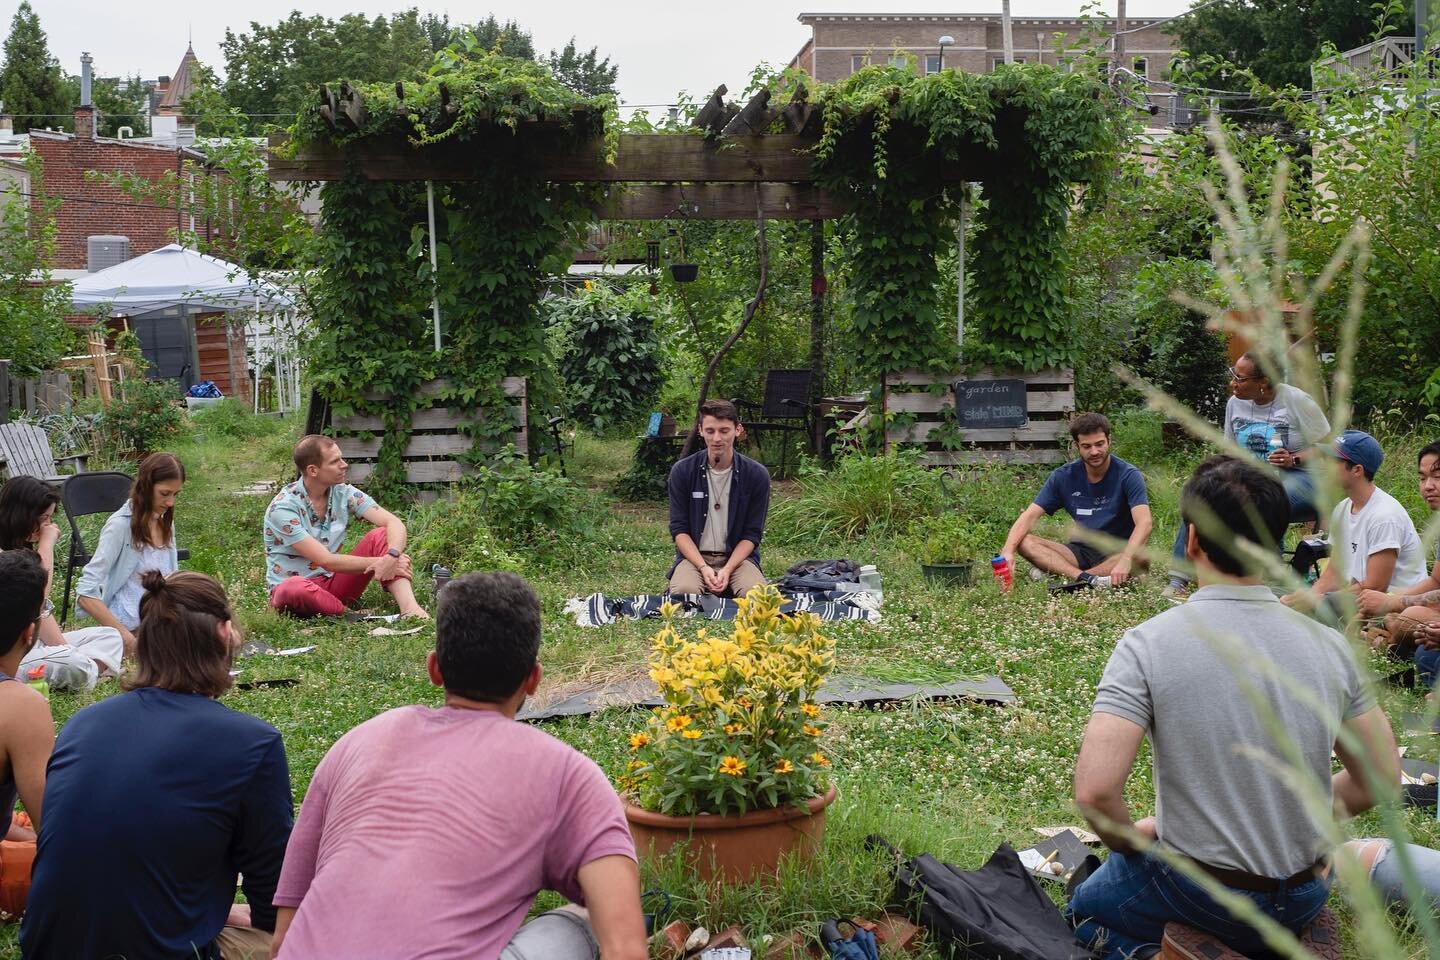 How 2 See a Plant : cohort 1 session 1
A cross between art history, ecology, and meditation
Befriending the grasses in the garden and practicing the art of close observation
The ways of seeing that *precede* naming and taxonomy and 
Help us relate to